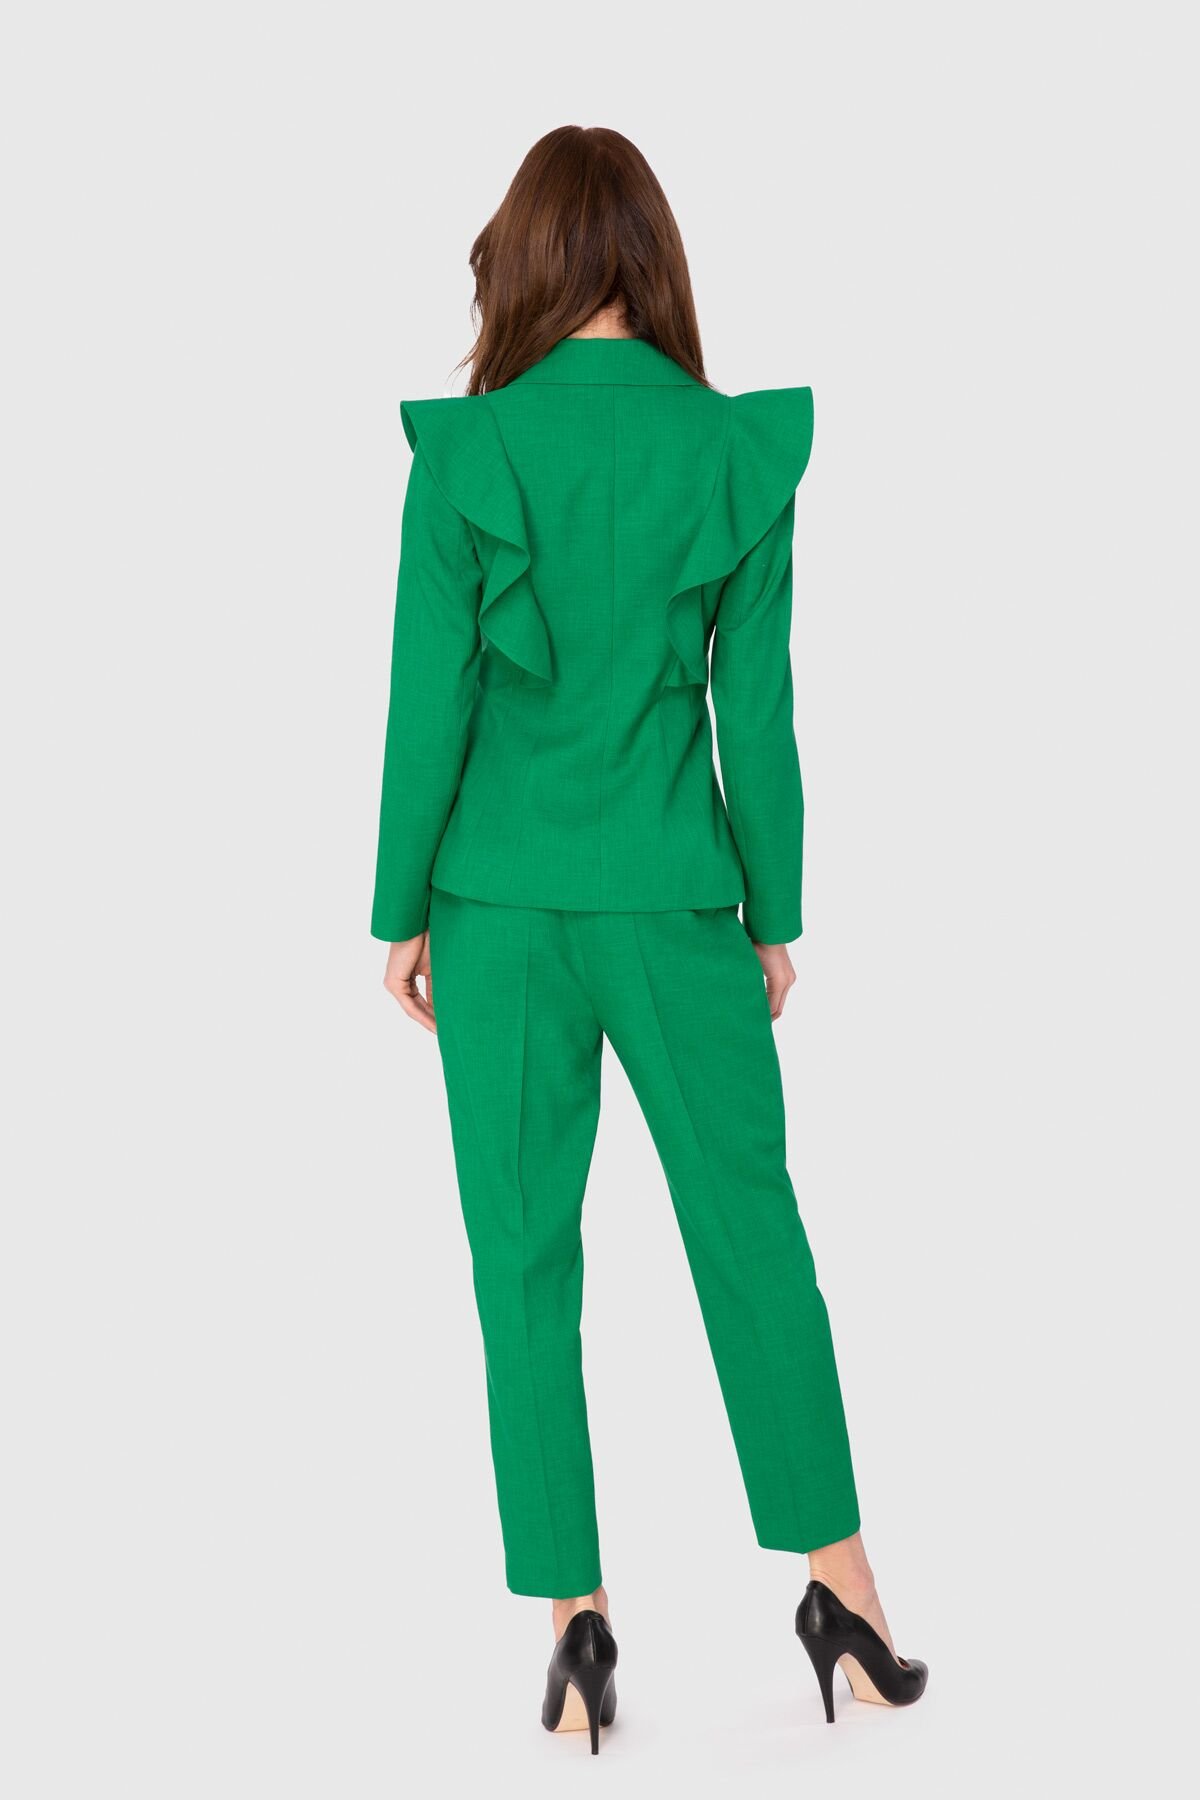 Flywheel Detailed Gold Button Fit Green Suit